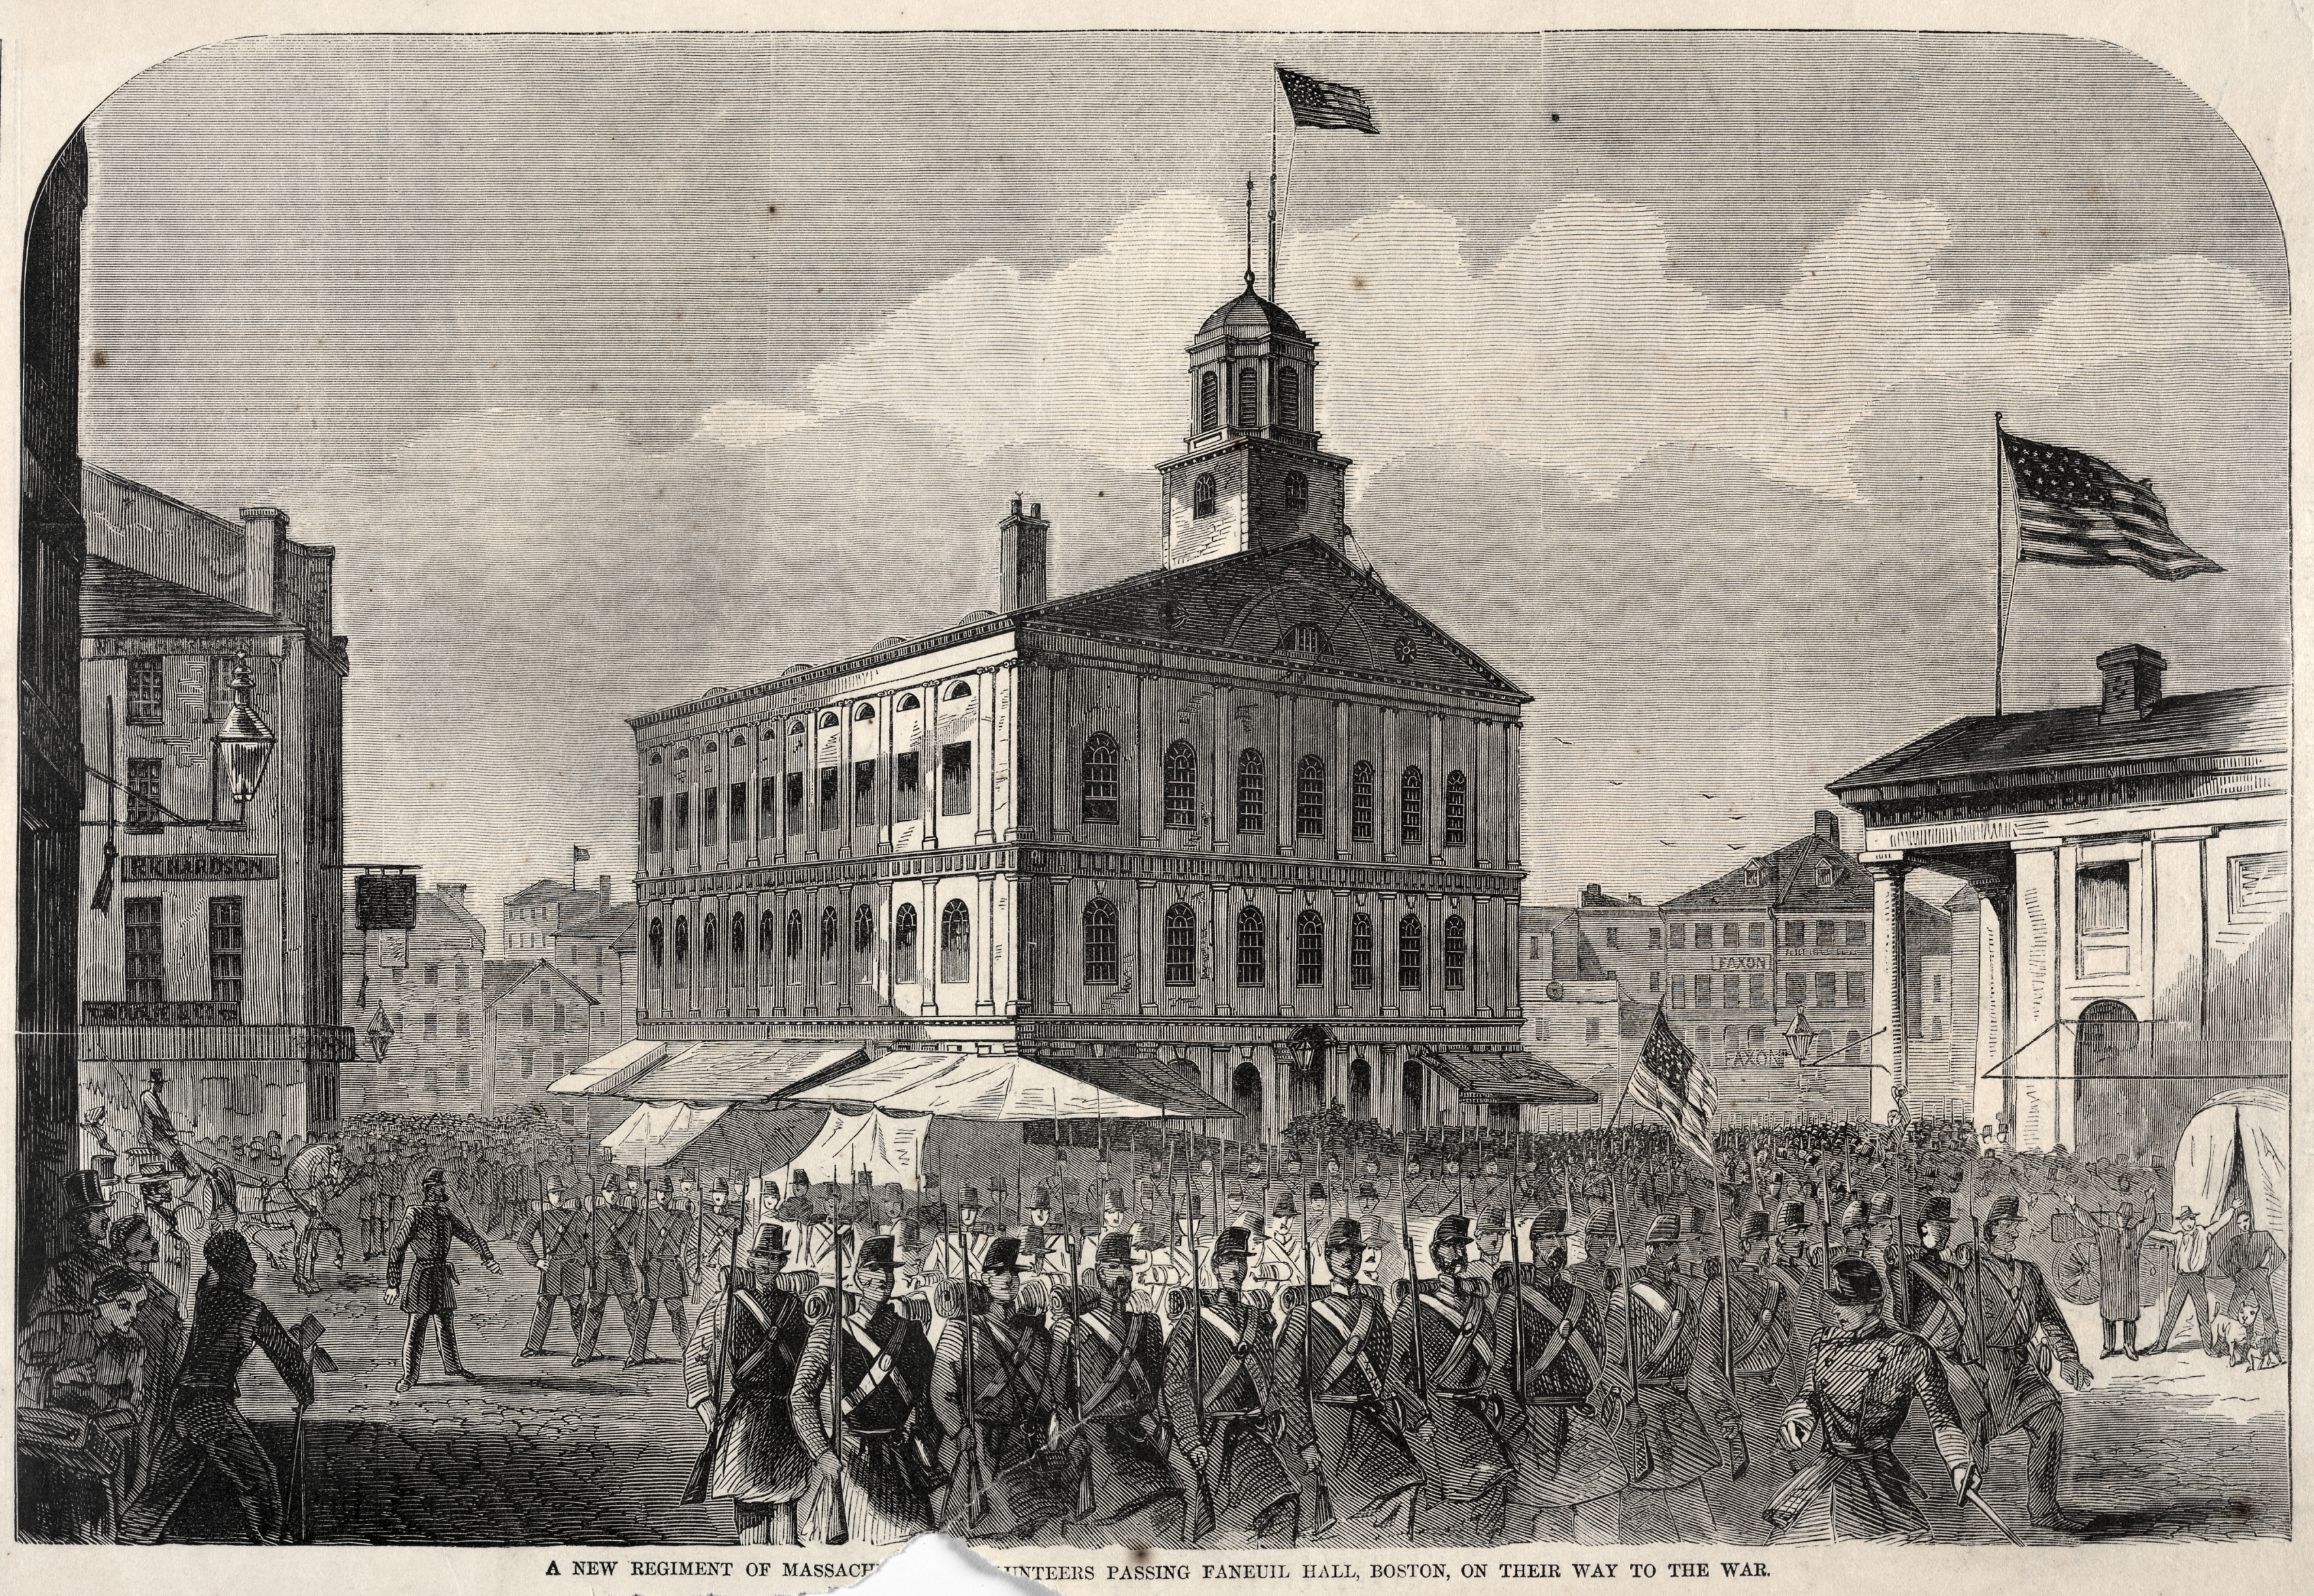 A New Regiment of Massachusetts Volunteers passing Faneuil Hall, Boston, on their way to War